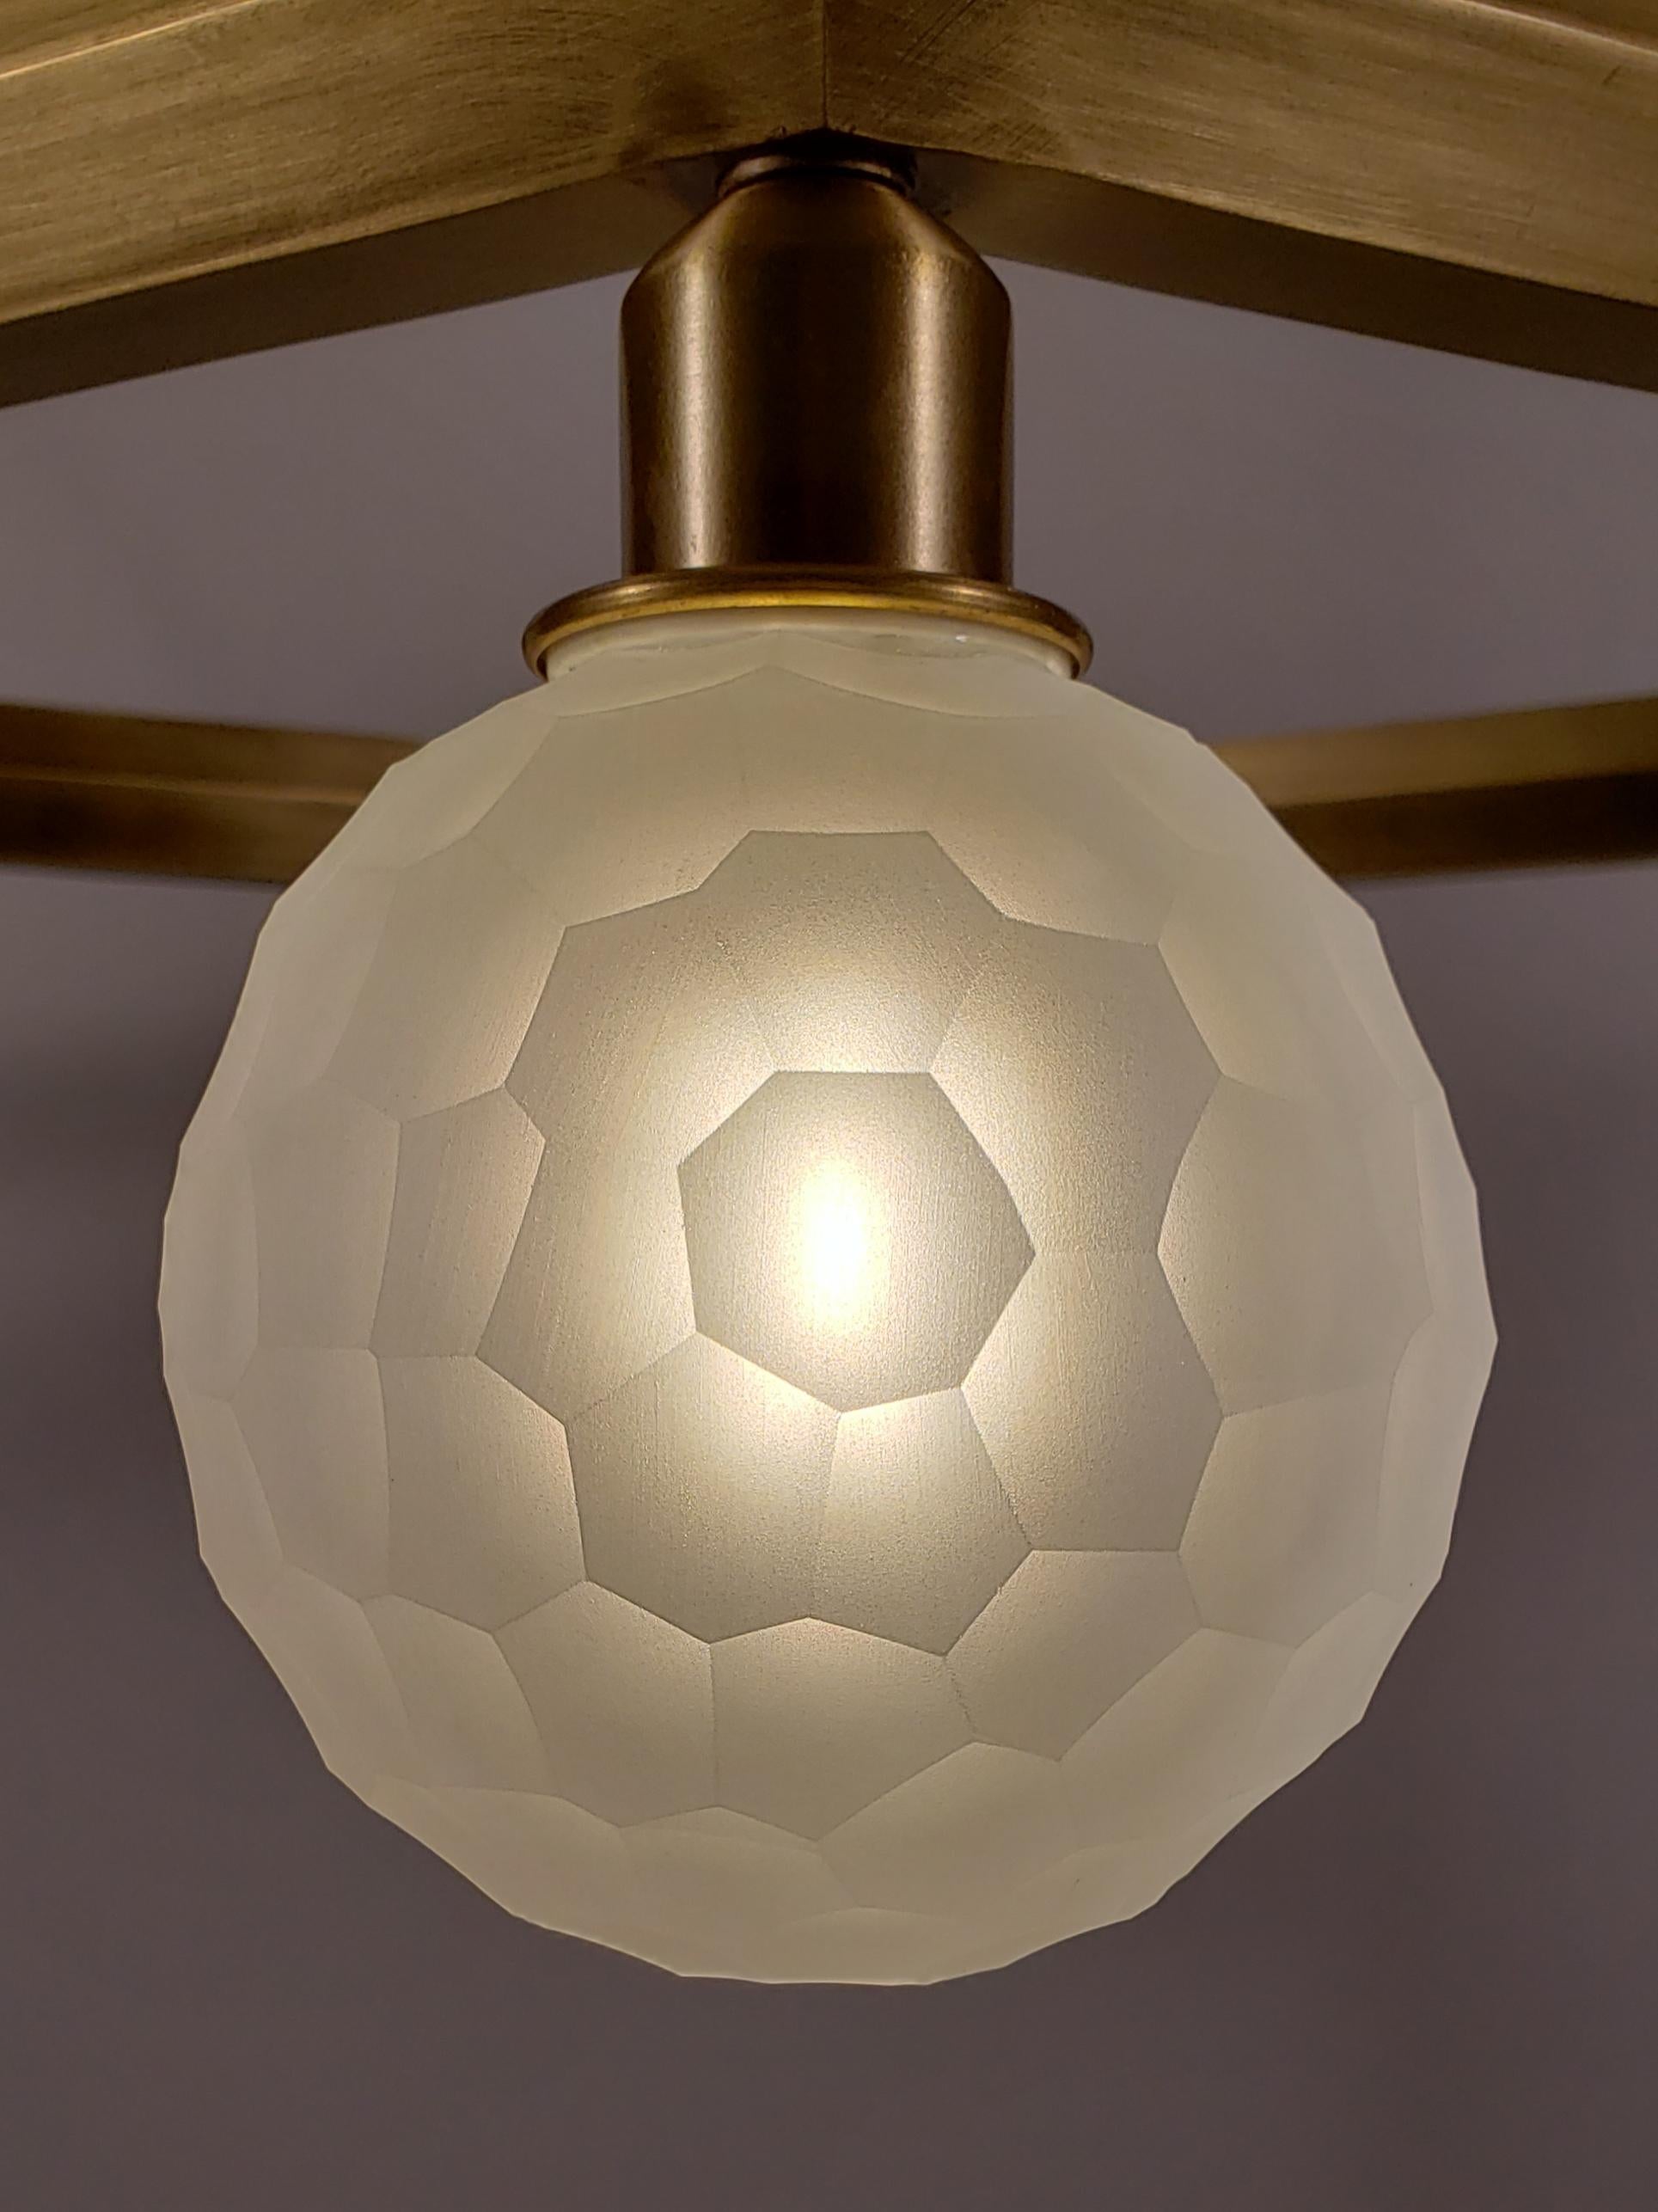 The Hex Series chandelier features six handblown glass orbs strategically arranged on a hexagon shaped frame. Each individual orb is hand carved on a diamond lathe to create the honeycomb, faceted pattern that perfectly compliments the hexagonal